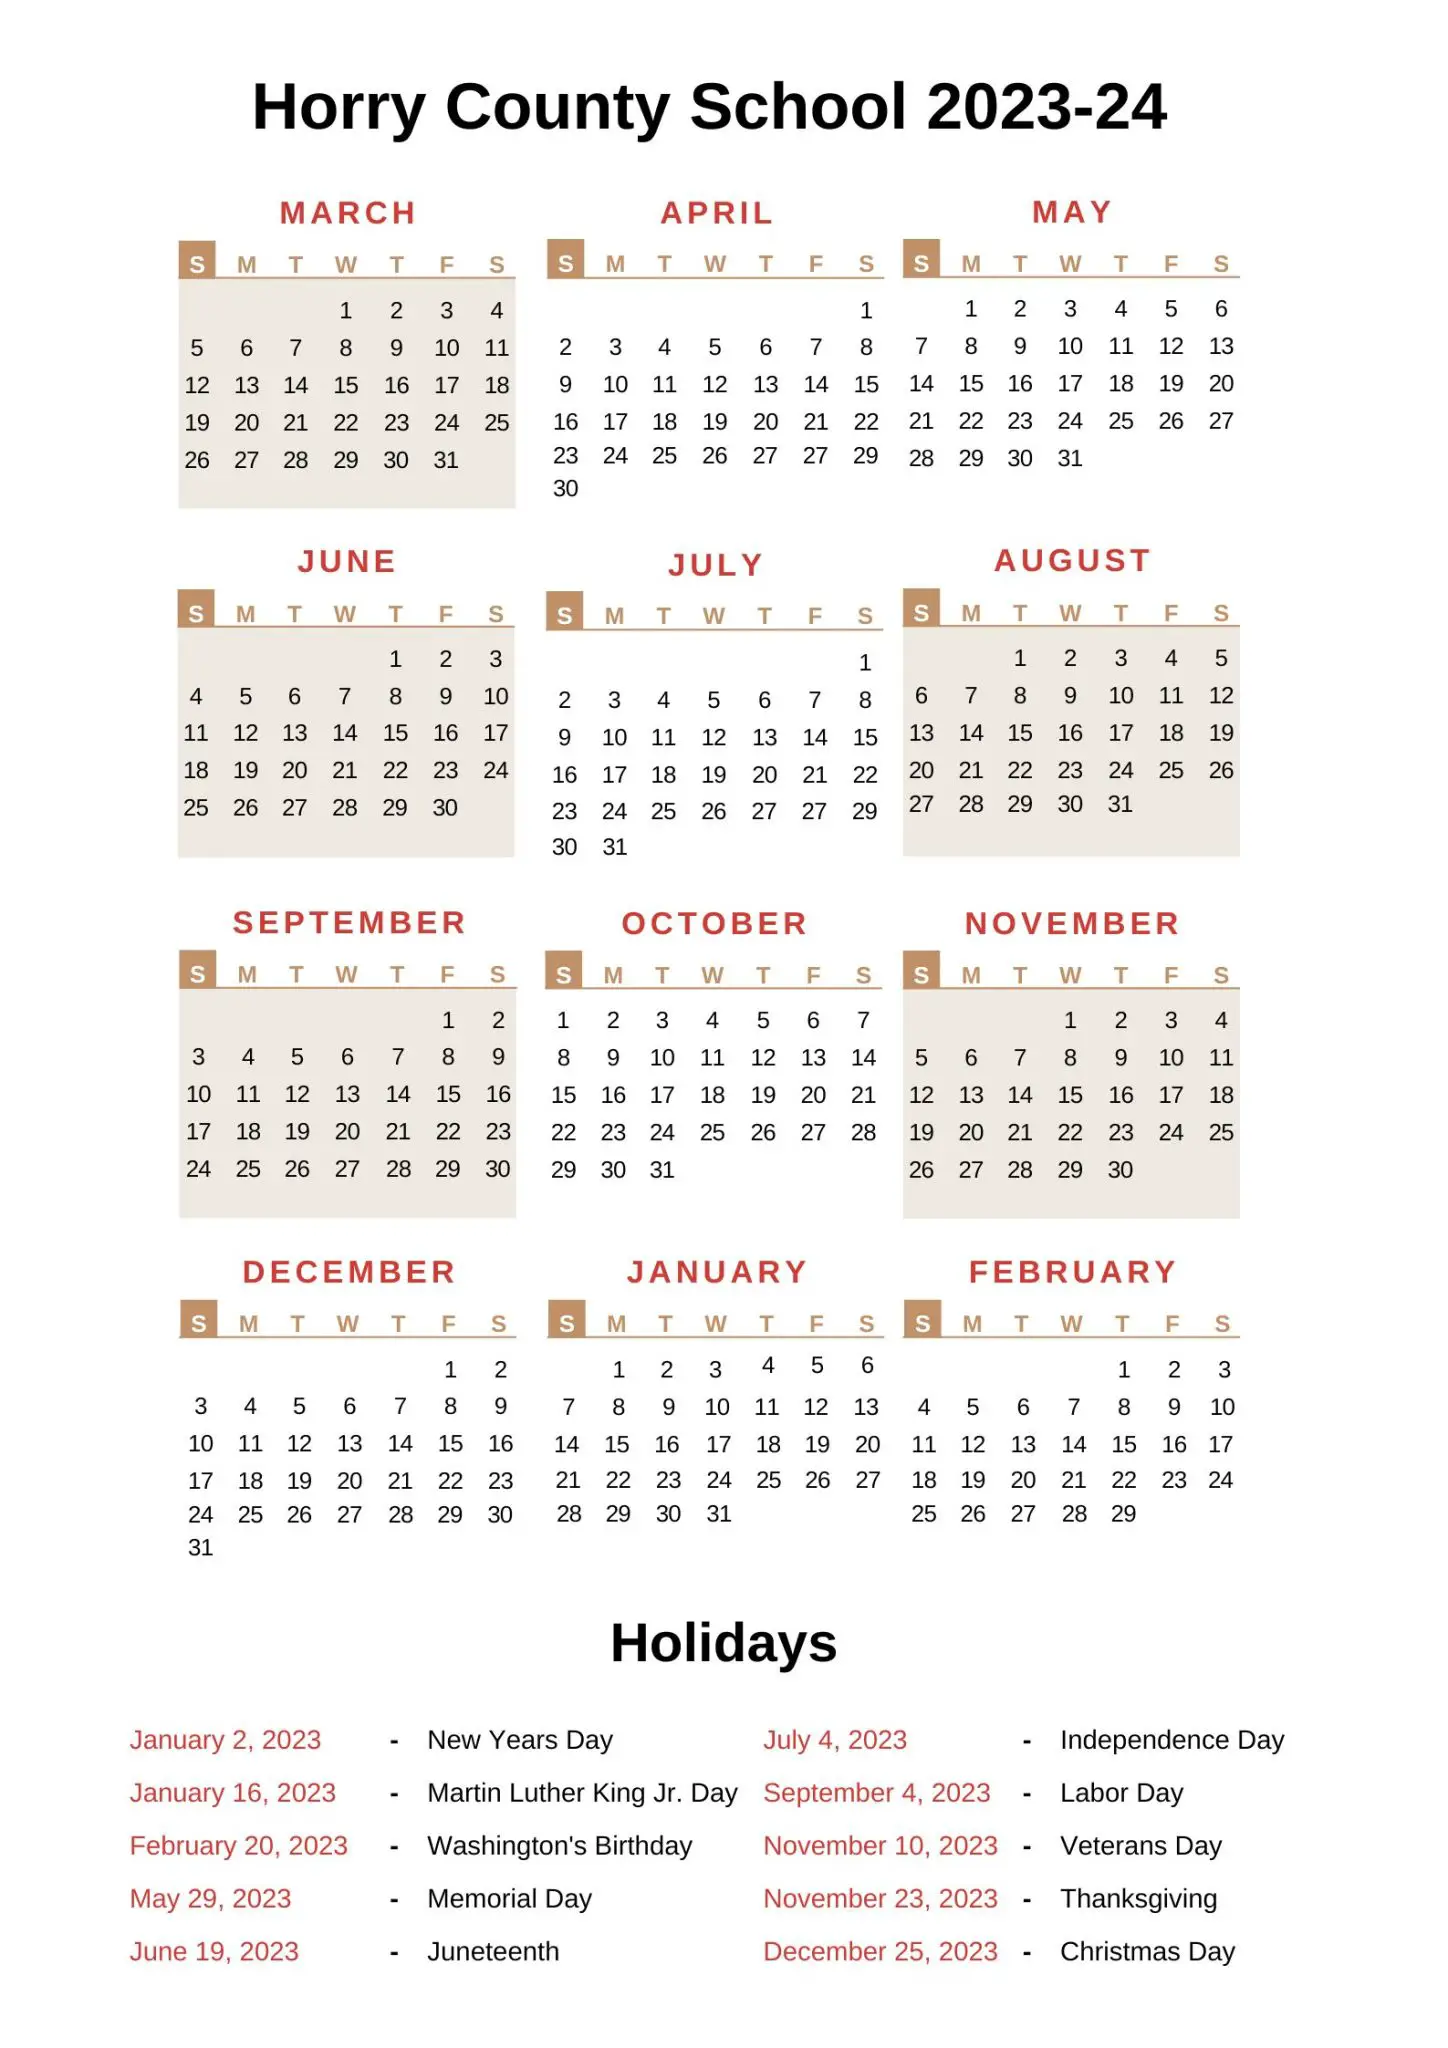 horry-county-schools-calendar-2023-24-with-holidays